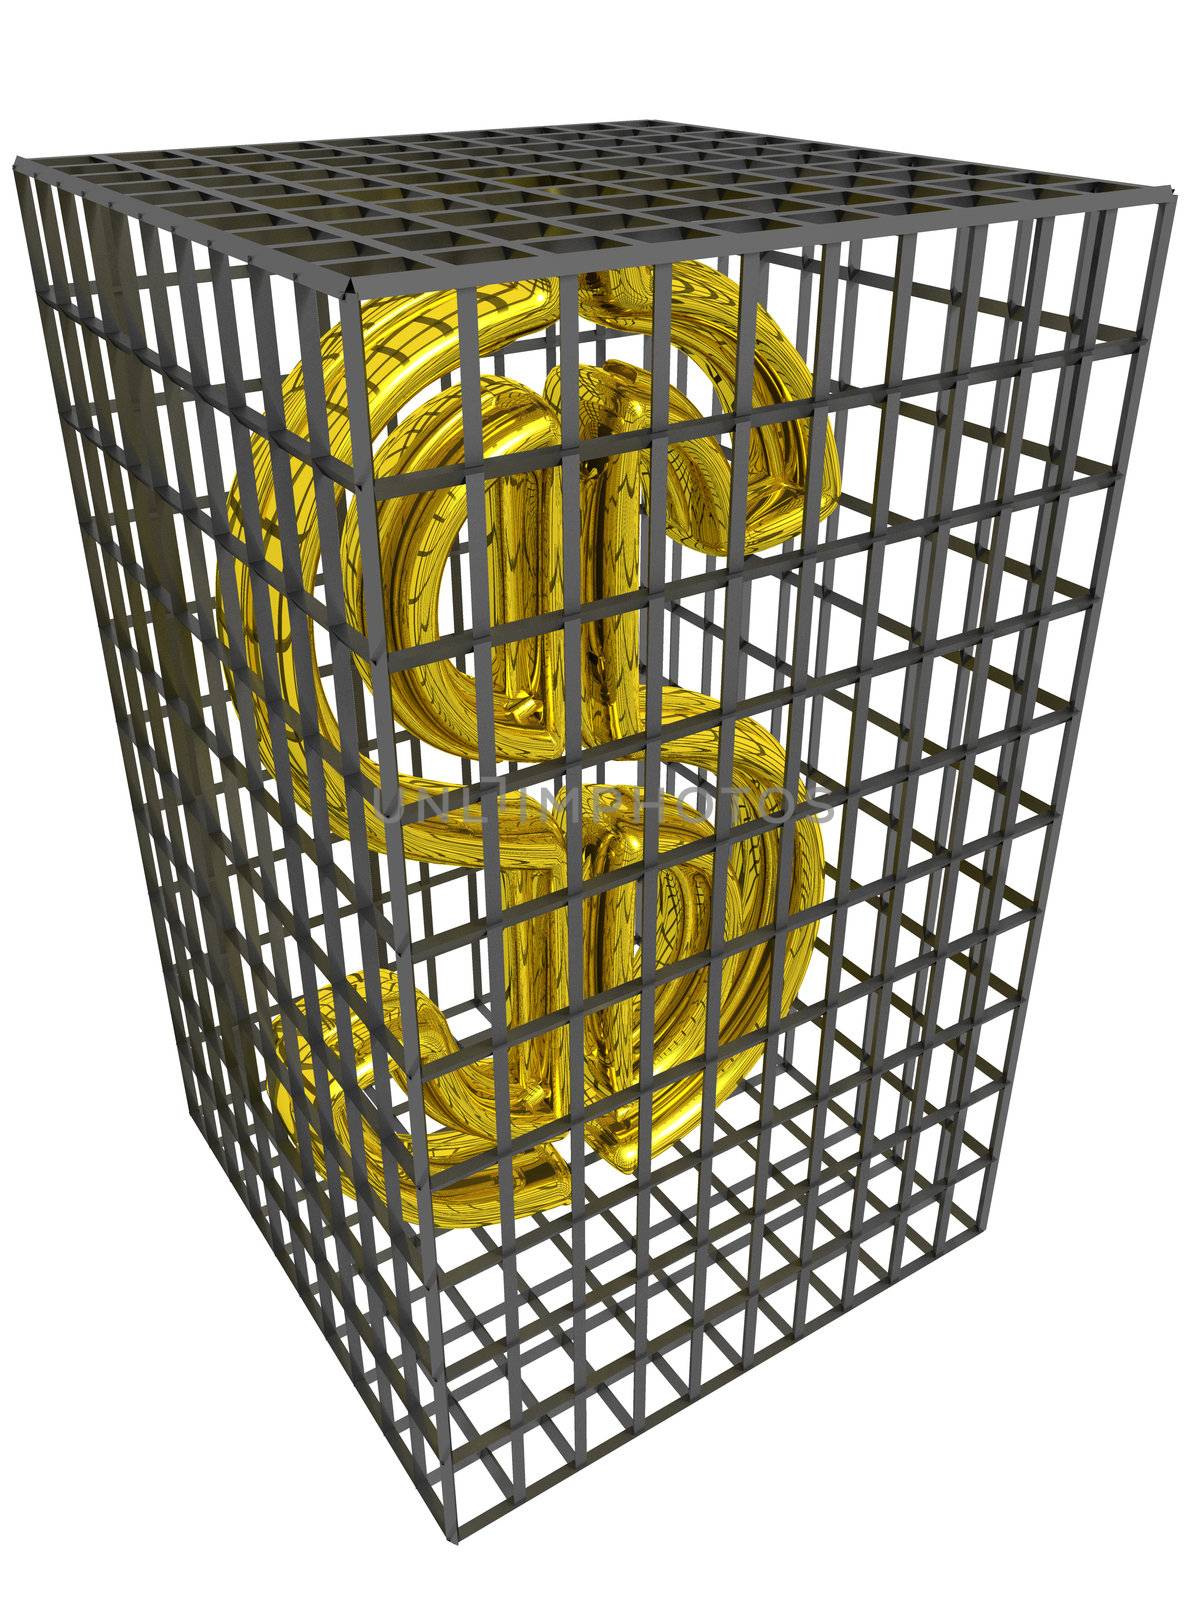 Gold dollar sign in a steel cage sumbolising anti-
globalist.